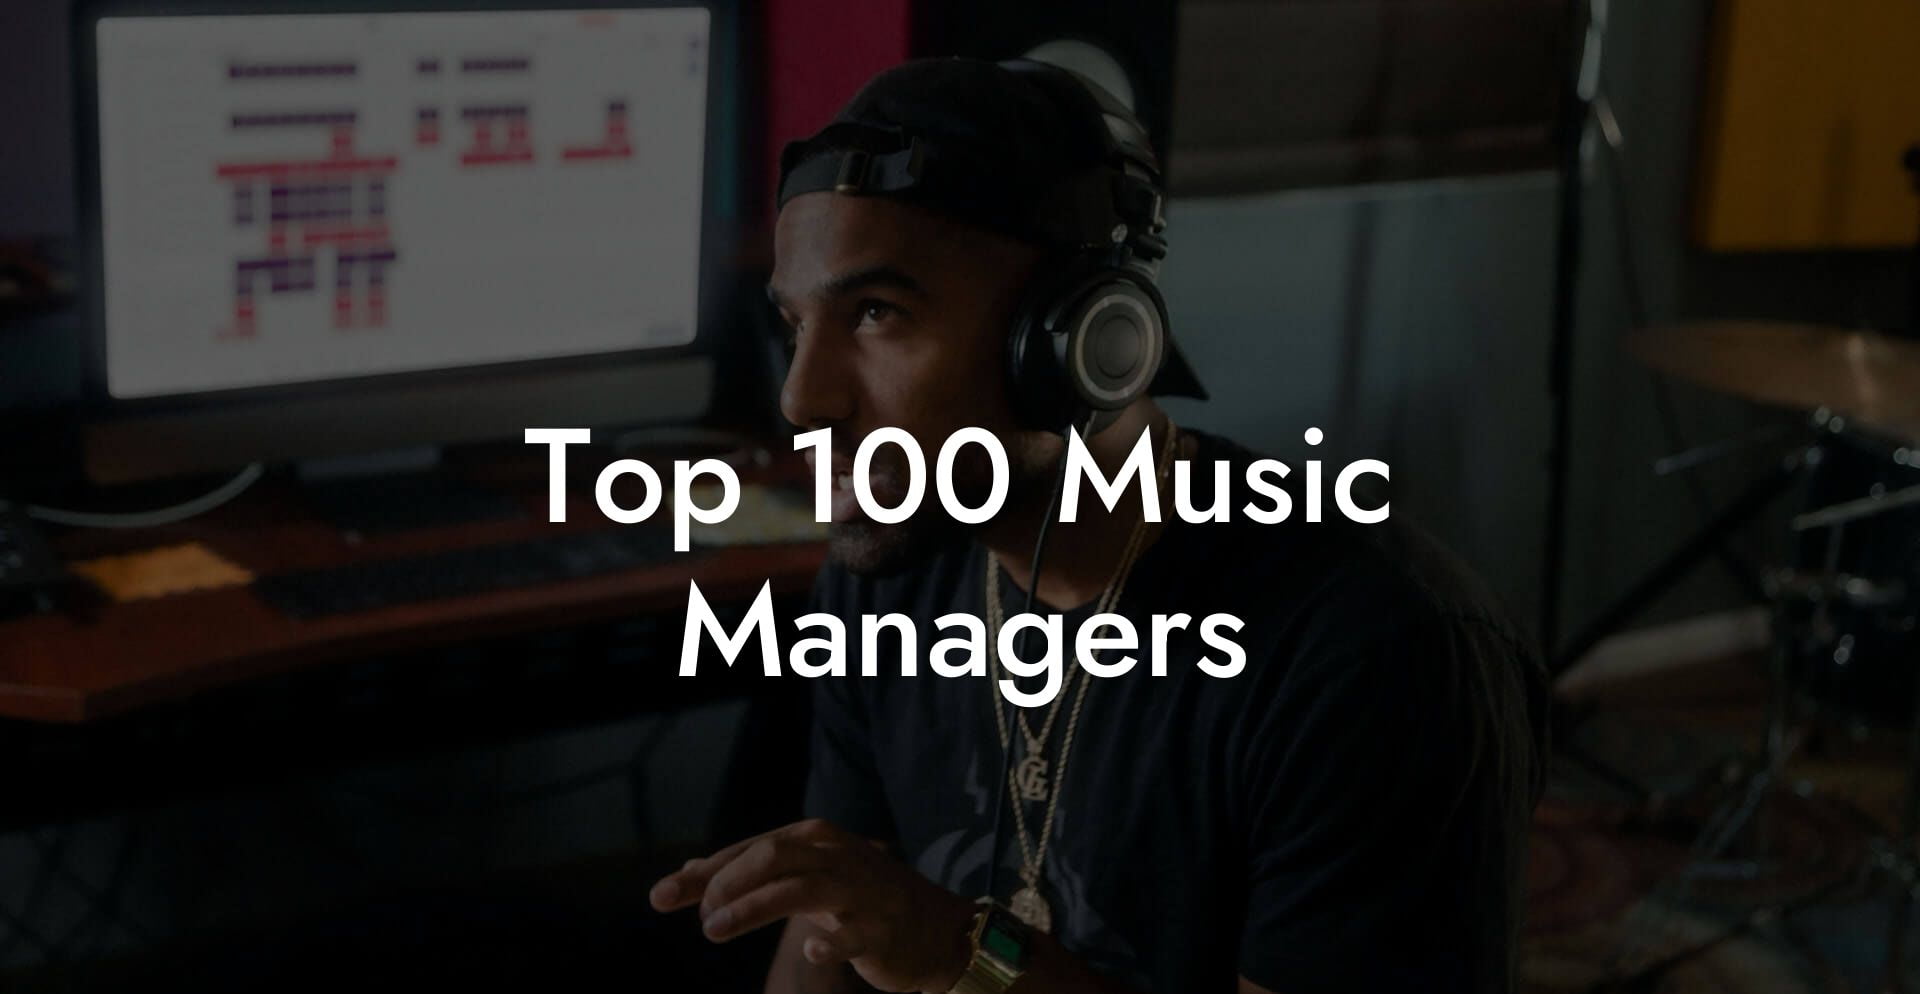 Top 100 Music Managers